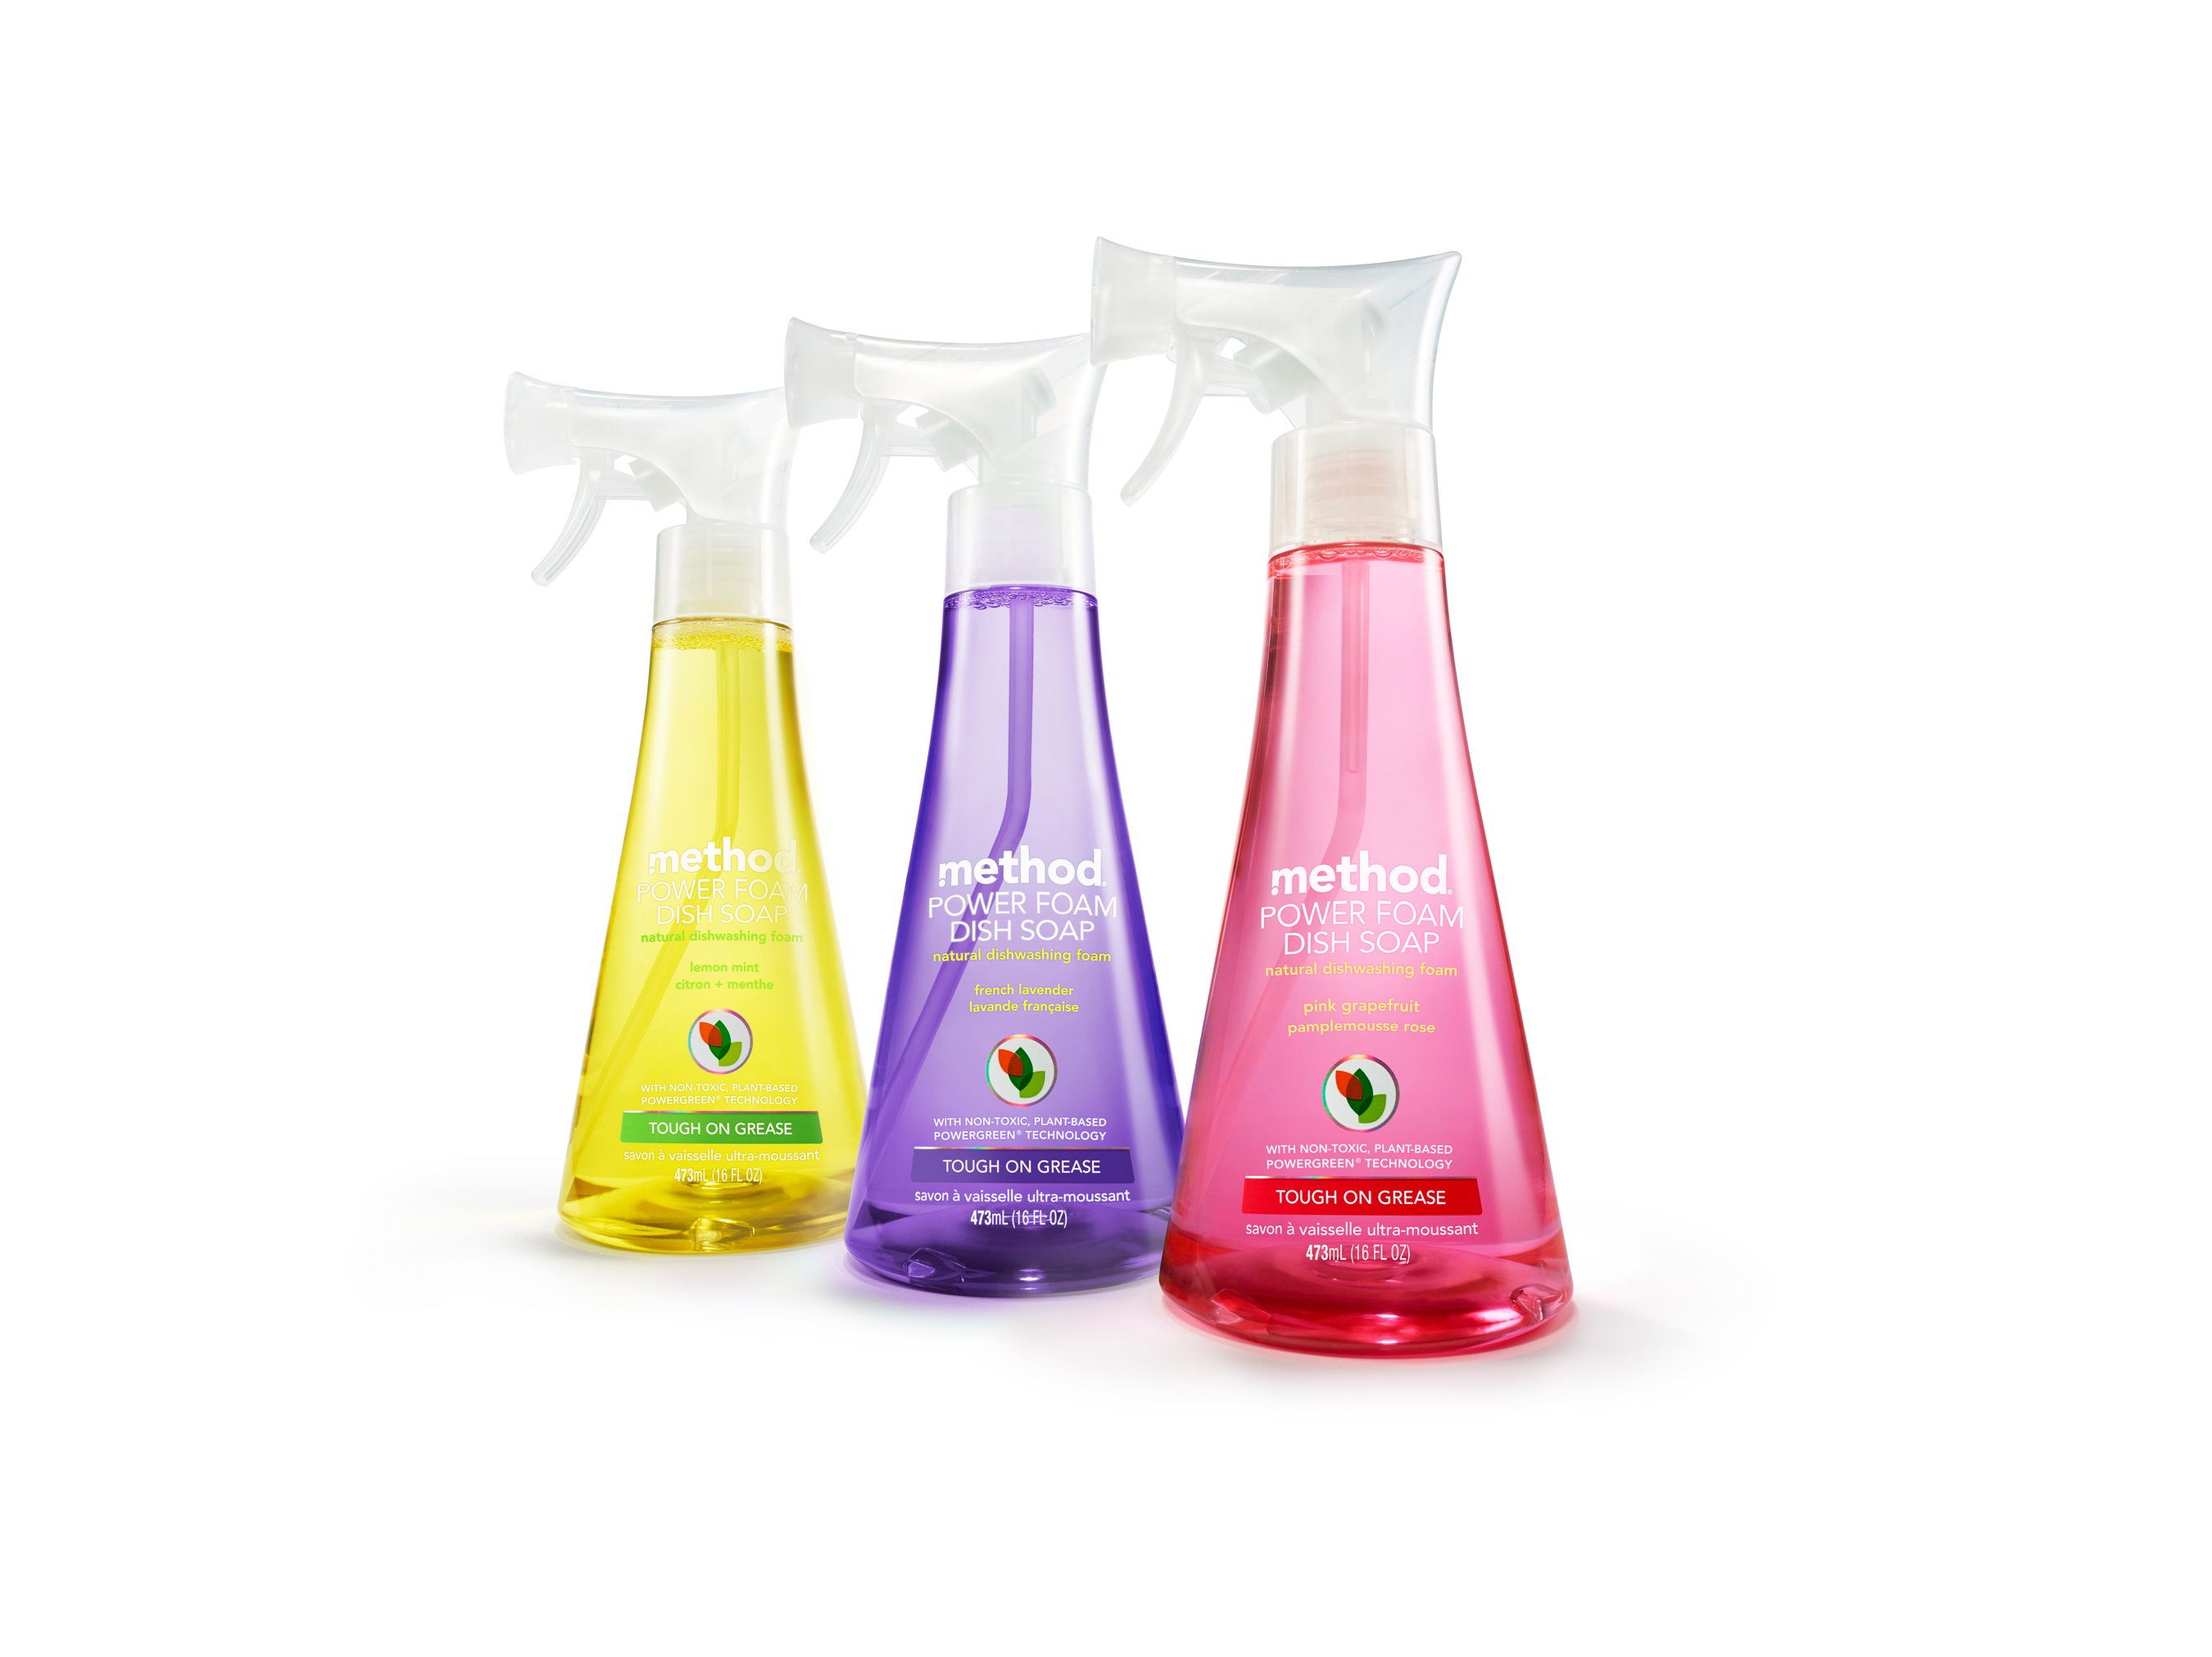 Method Launches Foaming Dish Soap in an Innovative Spray Design